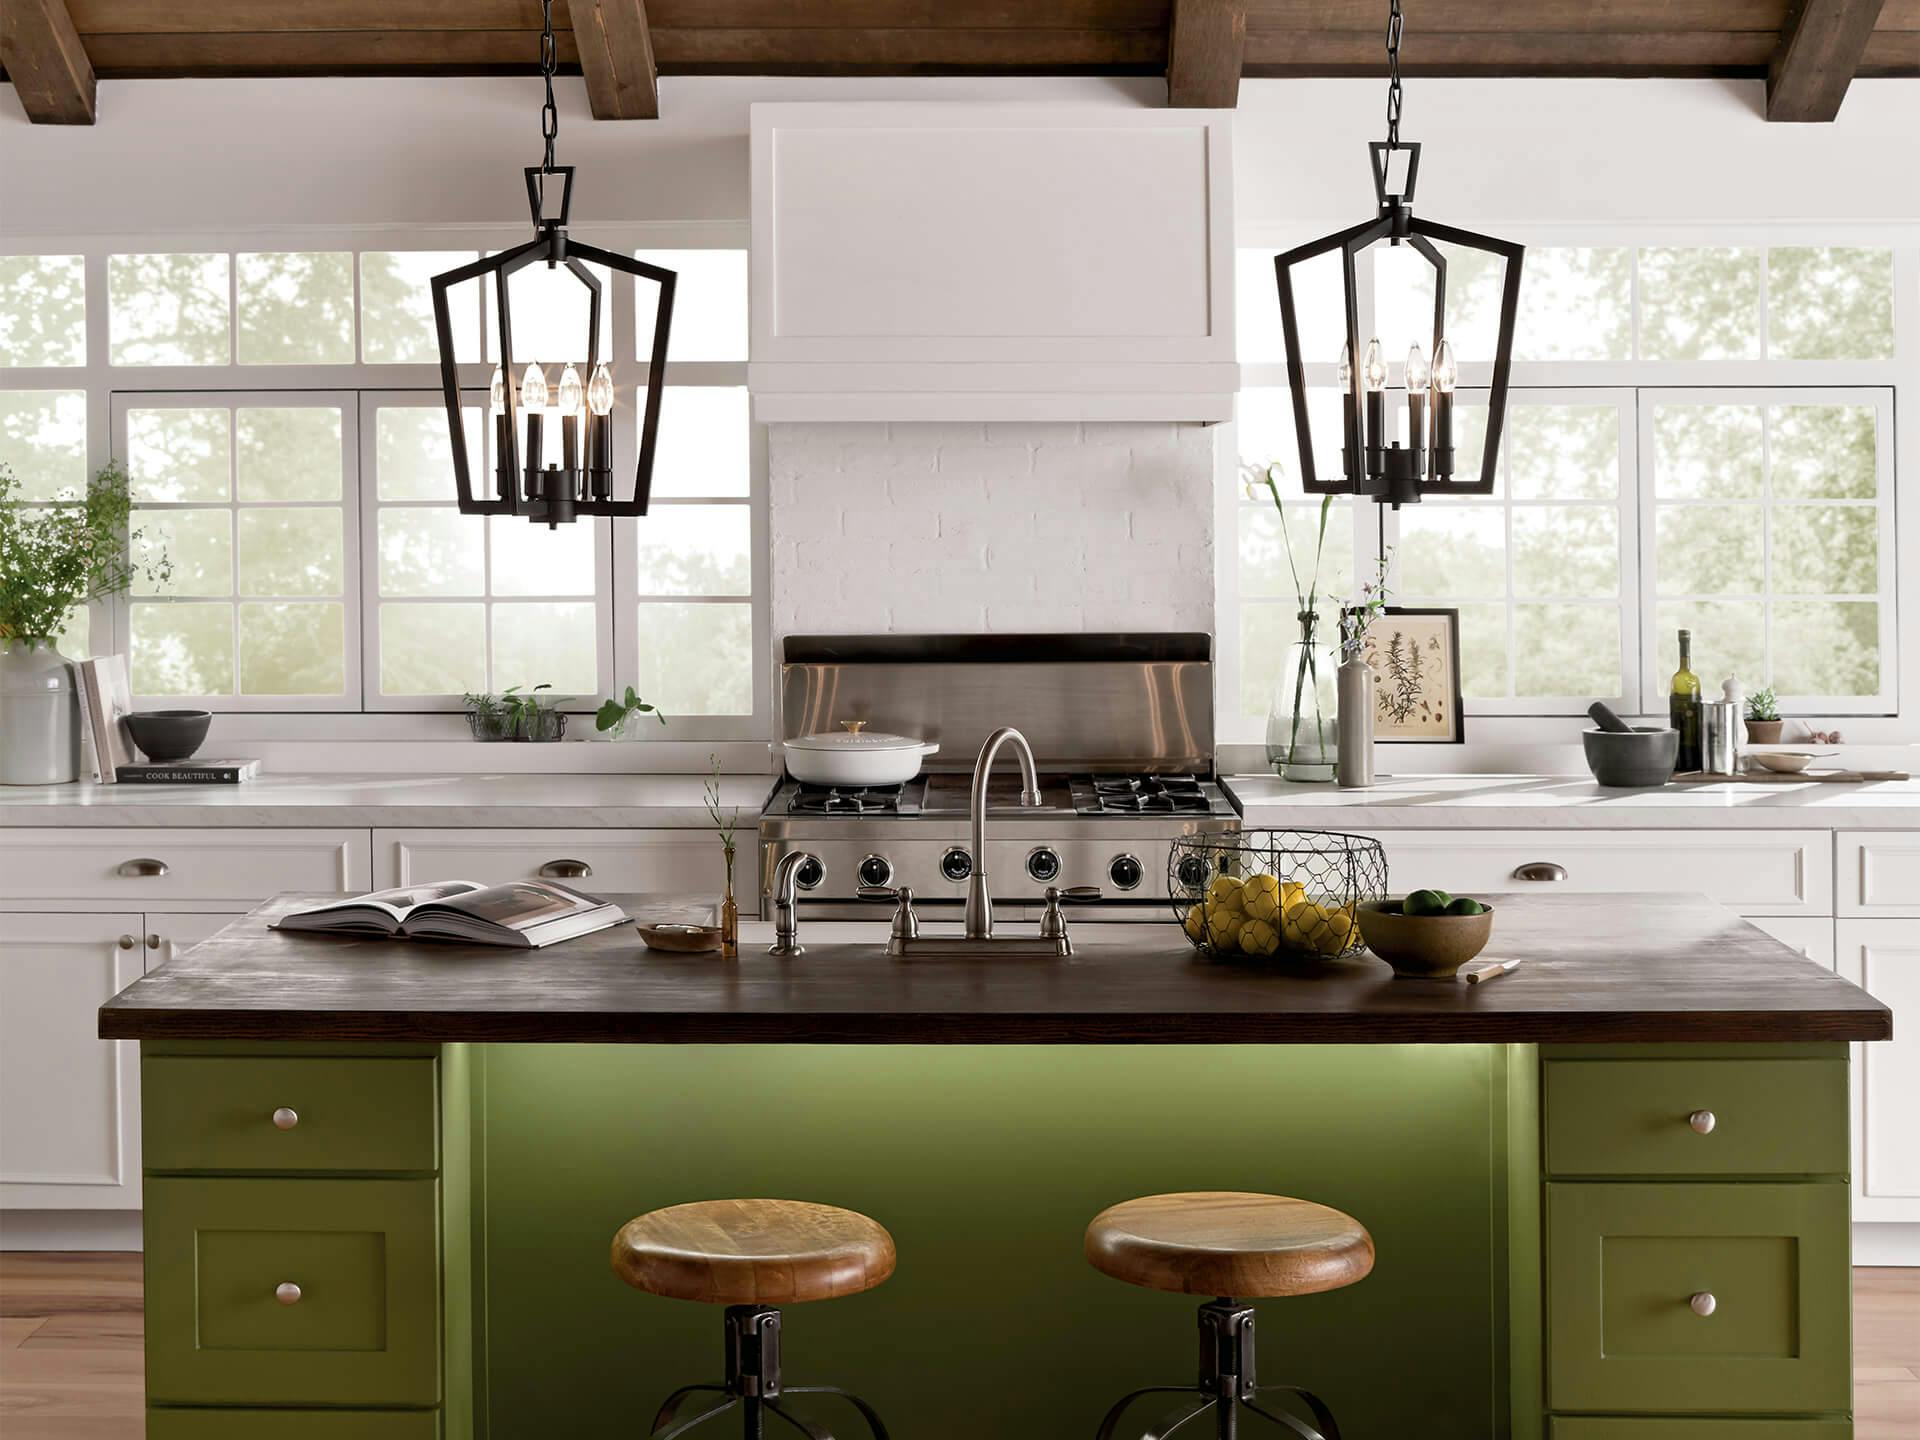 2 Abbotswell 19in 4 light pendants hanging over green kitchen island